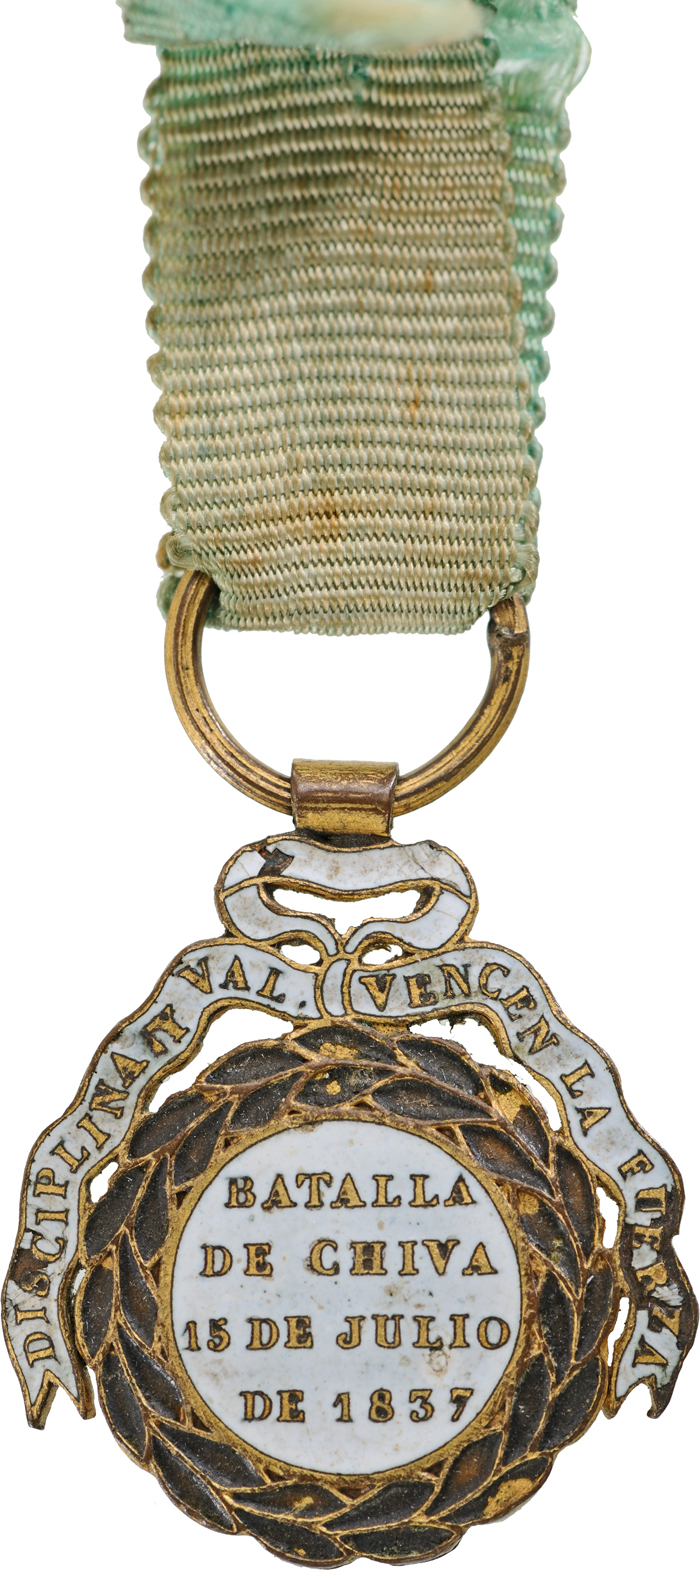 Merit and Commemorative Medal for the Battle of Chiva the Battle of Chiva